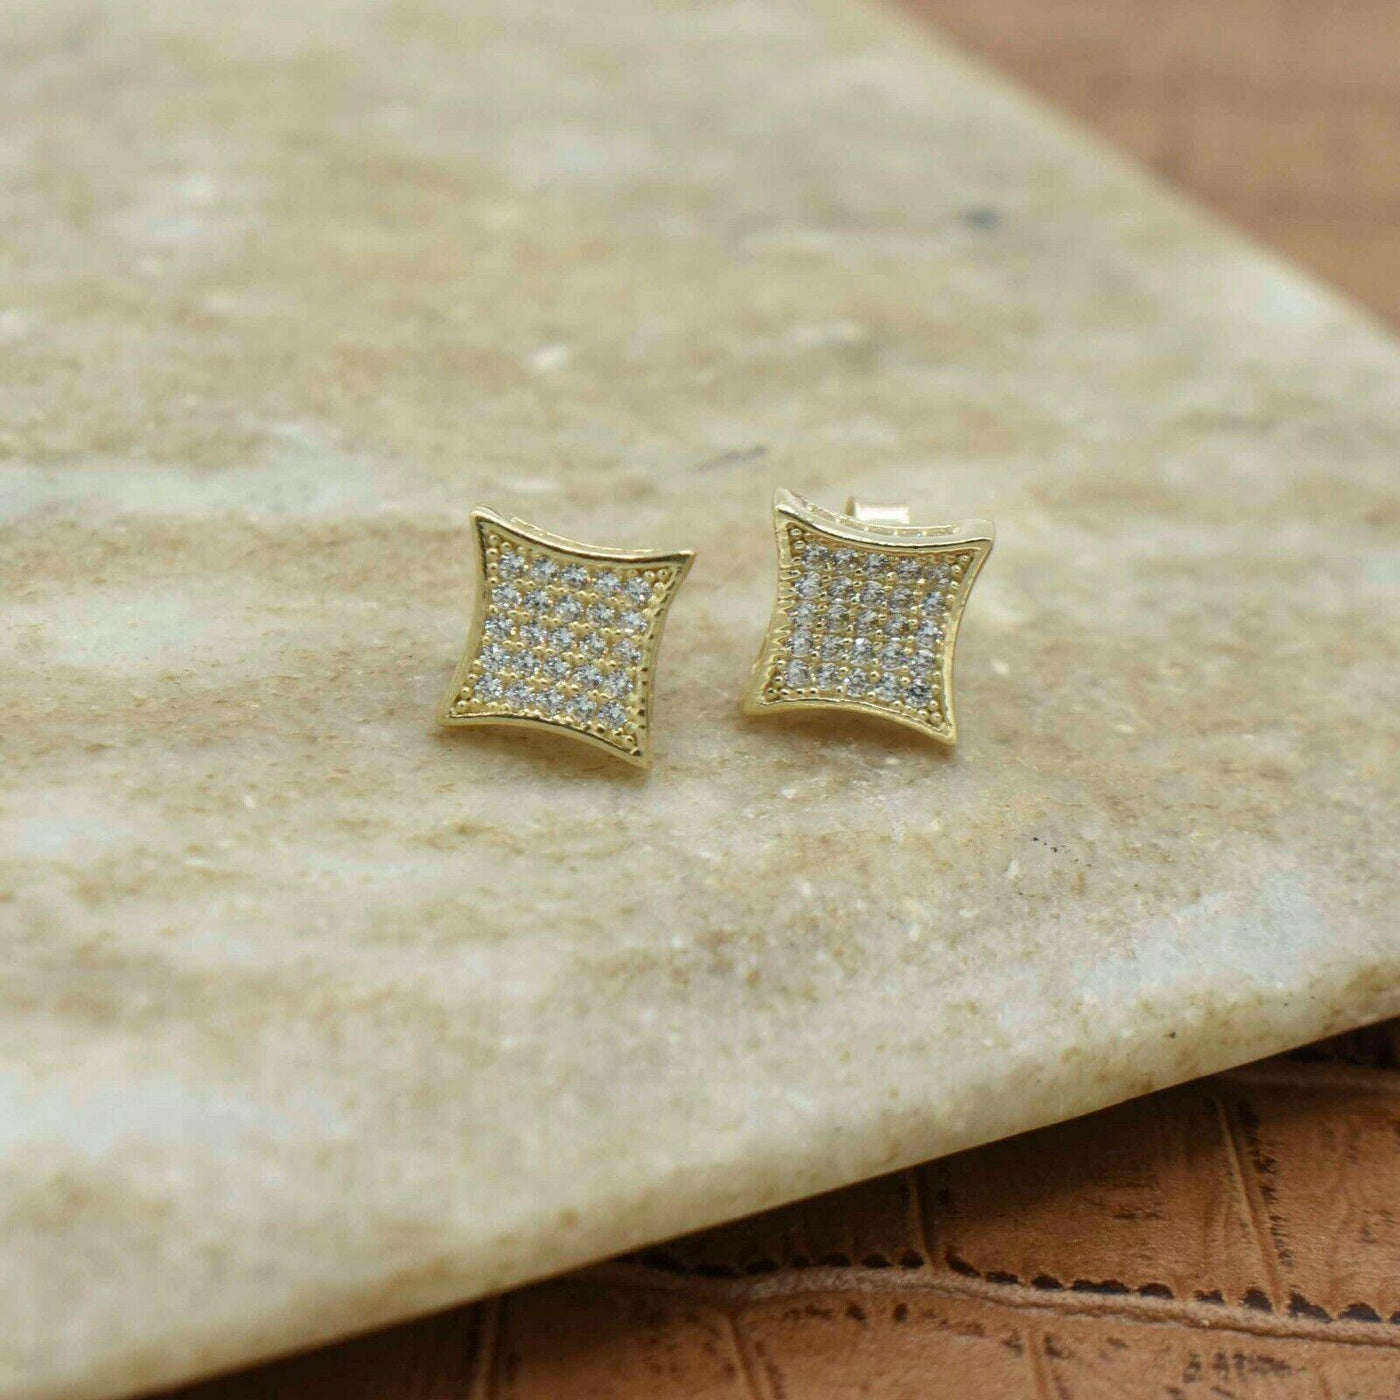 5/16" Women's Concave Square CZ Stud Earrings Solid 10K Yellow Gold - bayamjewelry